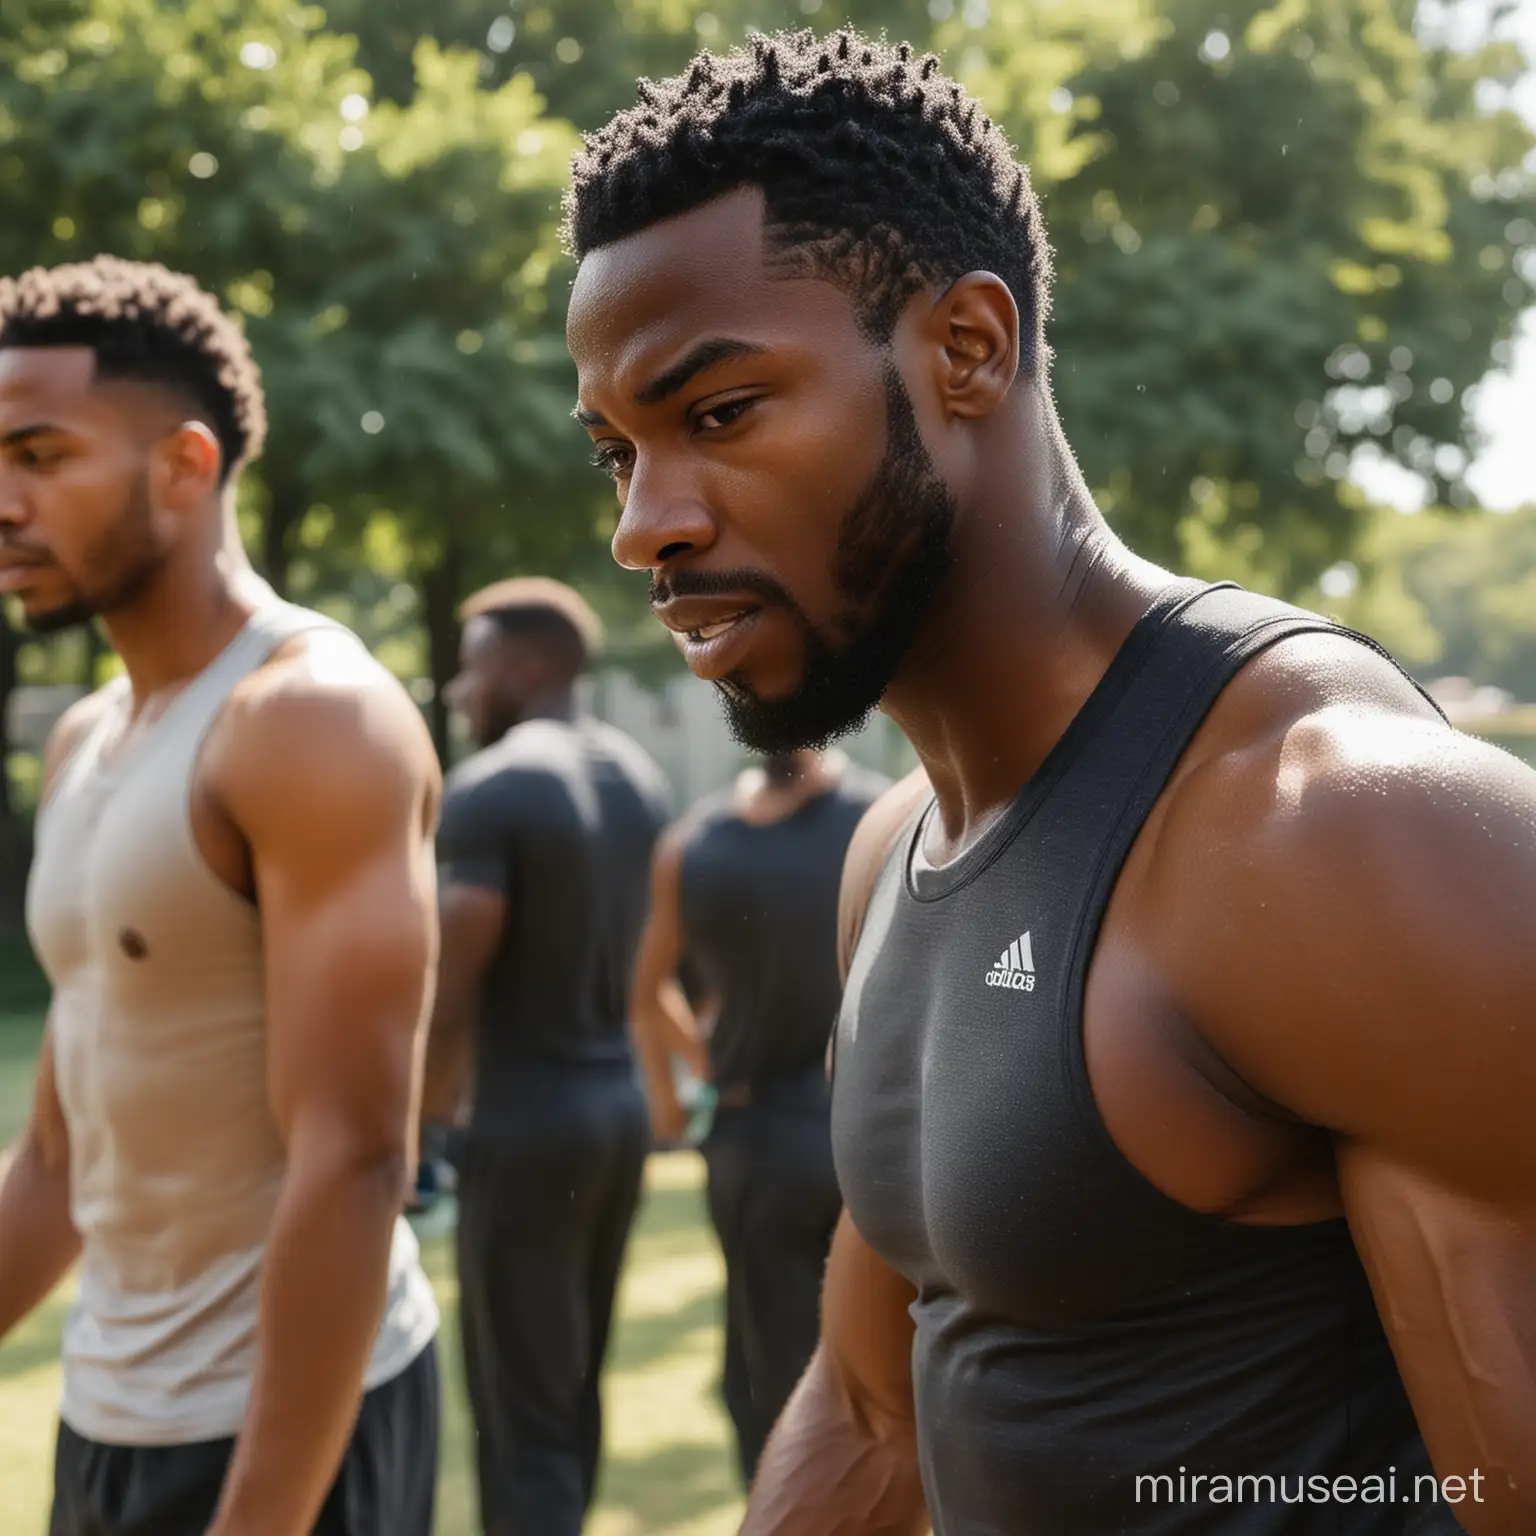 Outdoor Training Session African American Male Athletes in Intense Workout